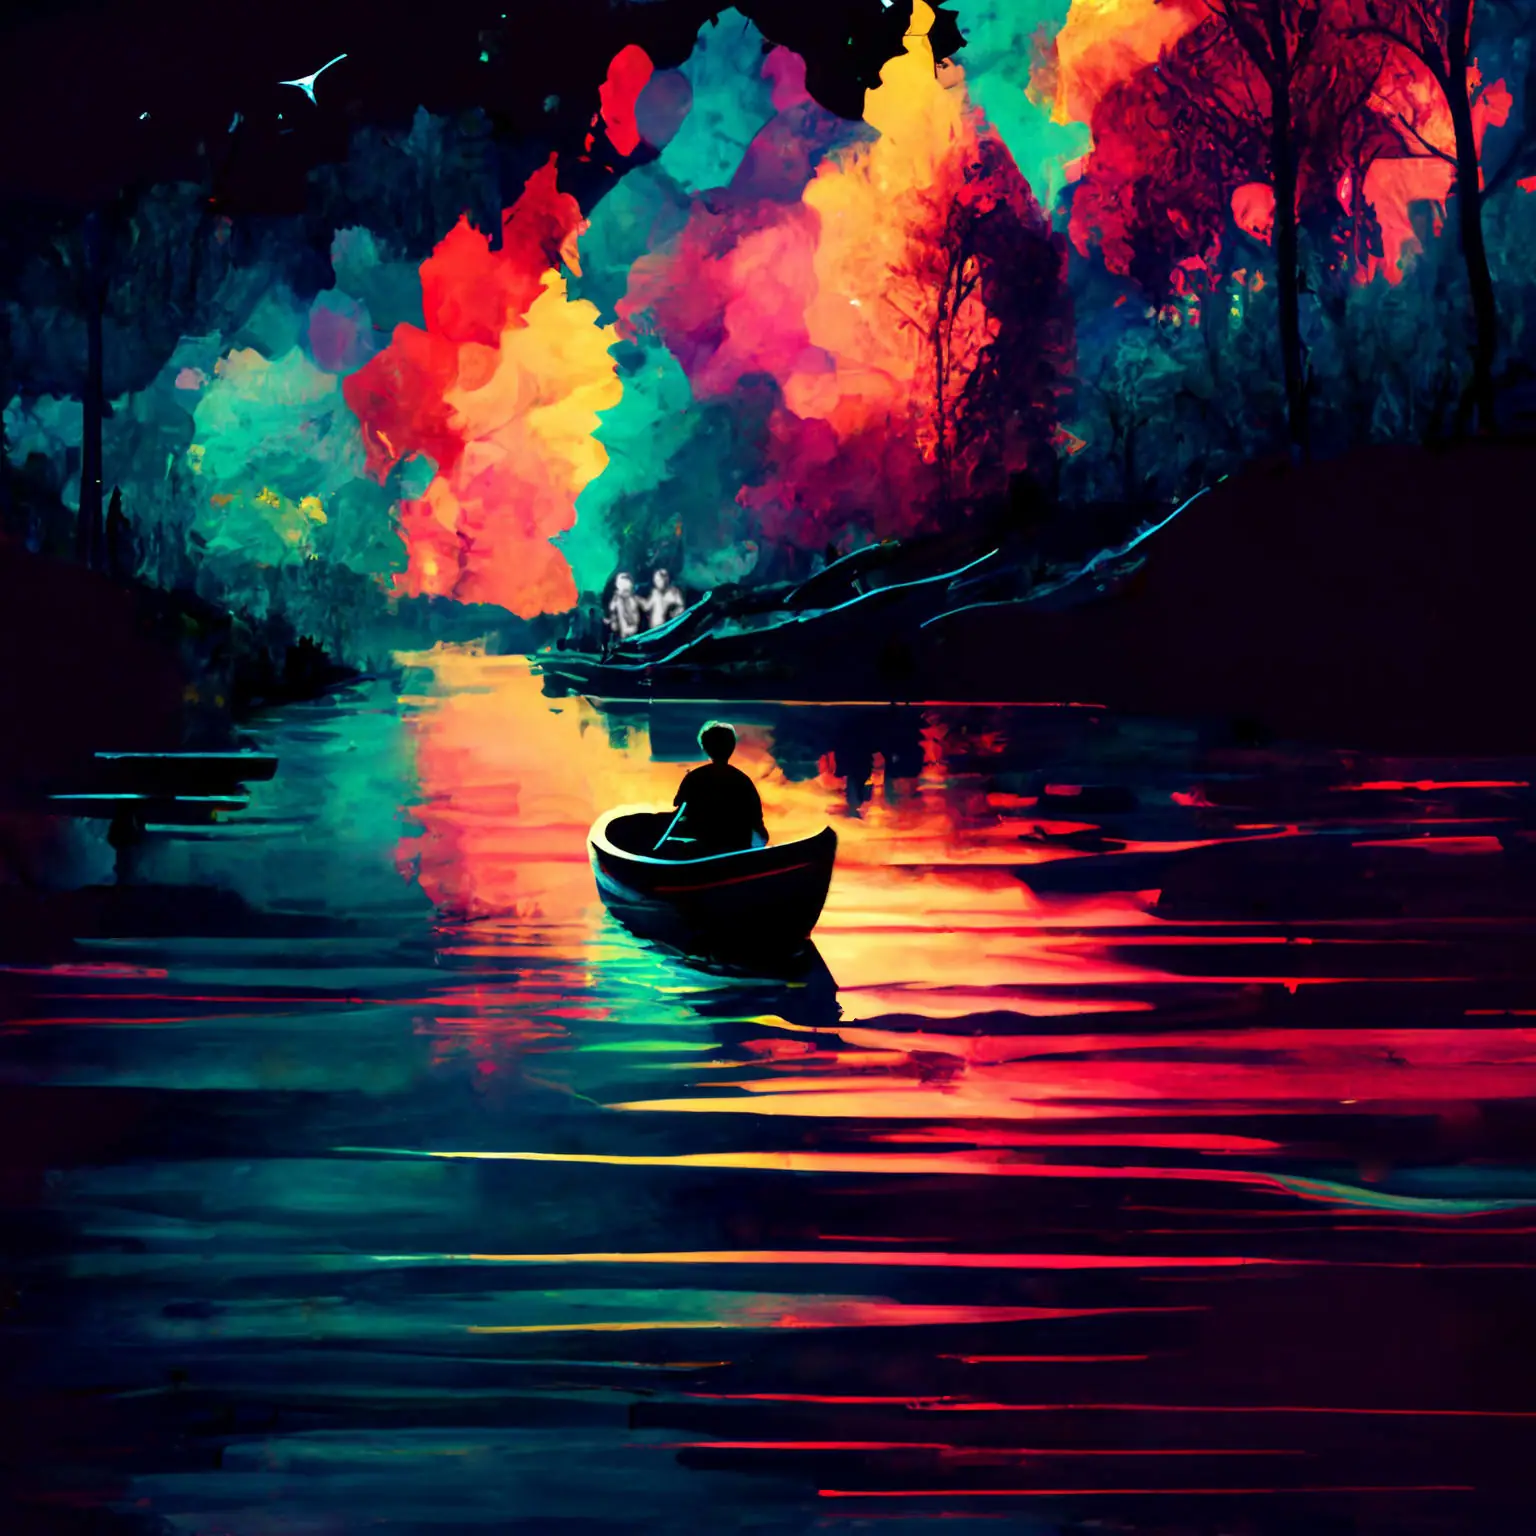 A colourful artistic rendering of a person in a canoe on a river in the woods.